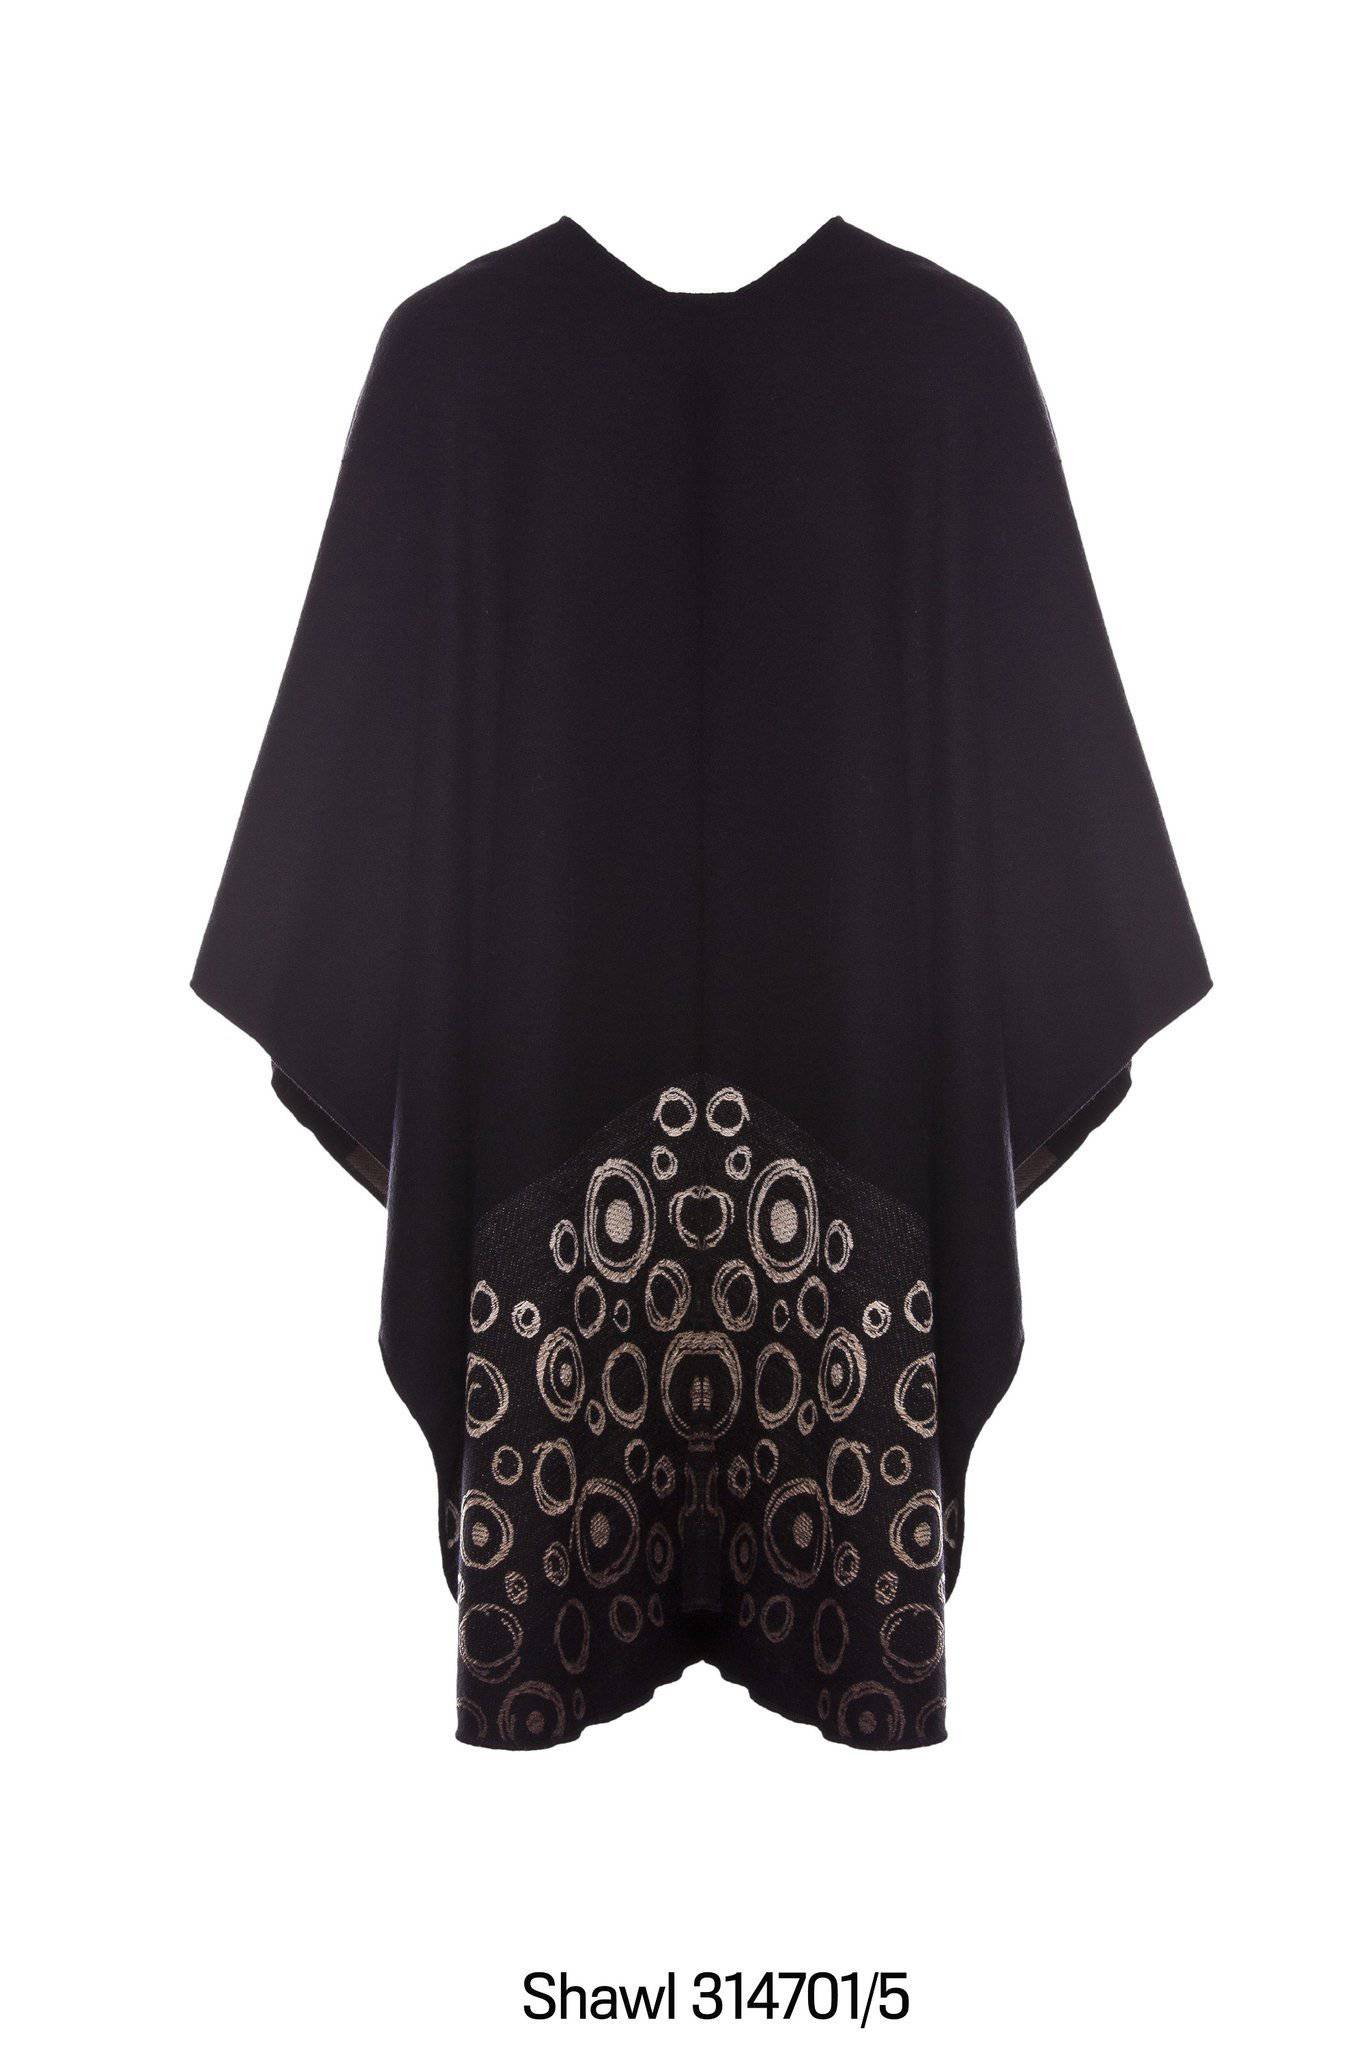 Jimmy Hourihan Shawl in Black/Earth Tones with Bubbles Motif